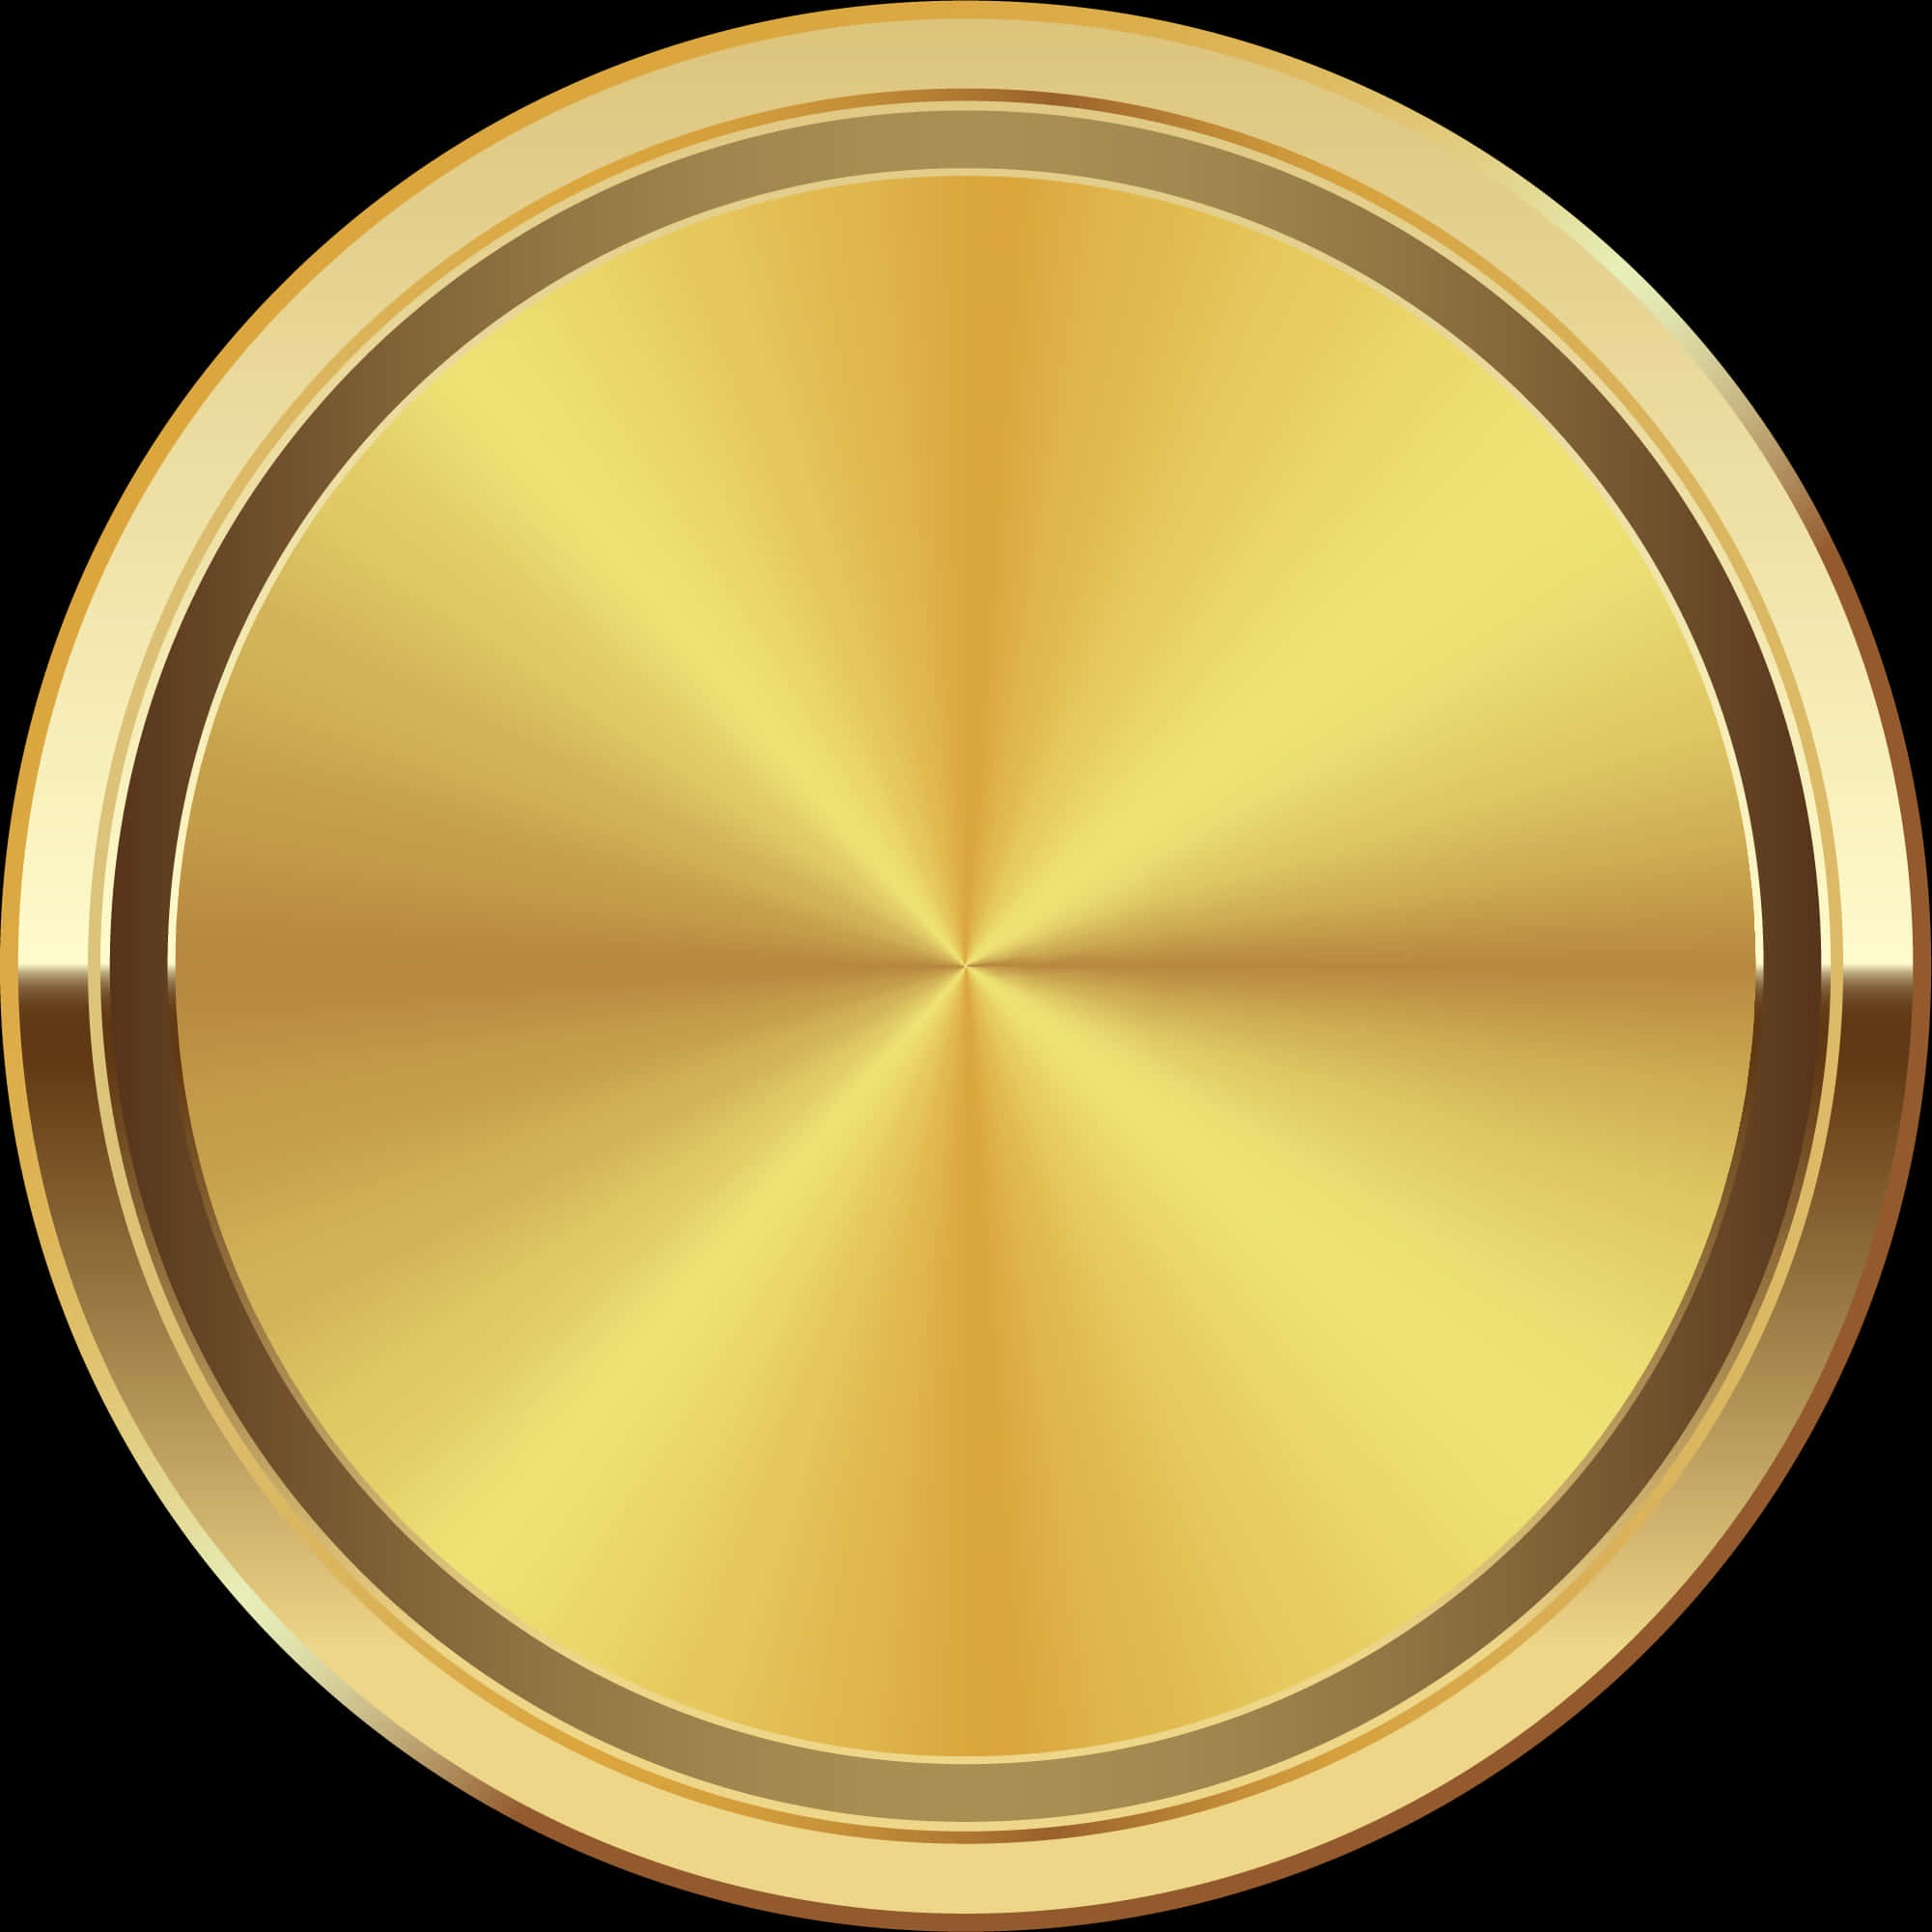 A Gold Circle With A Black Background